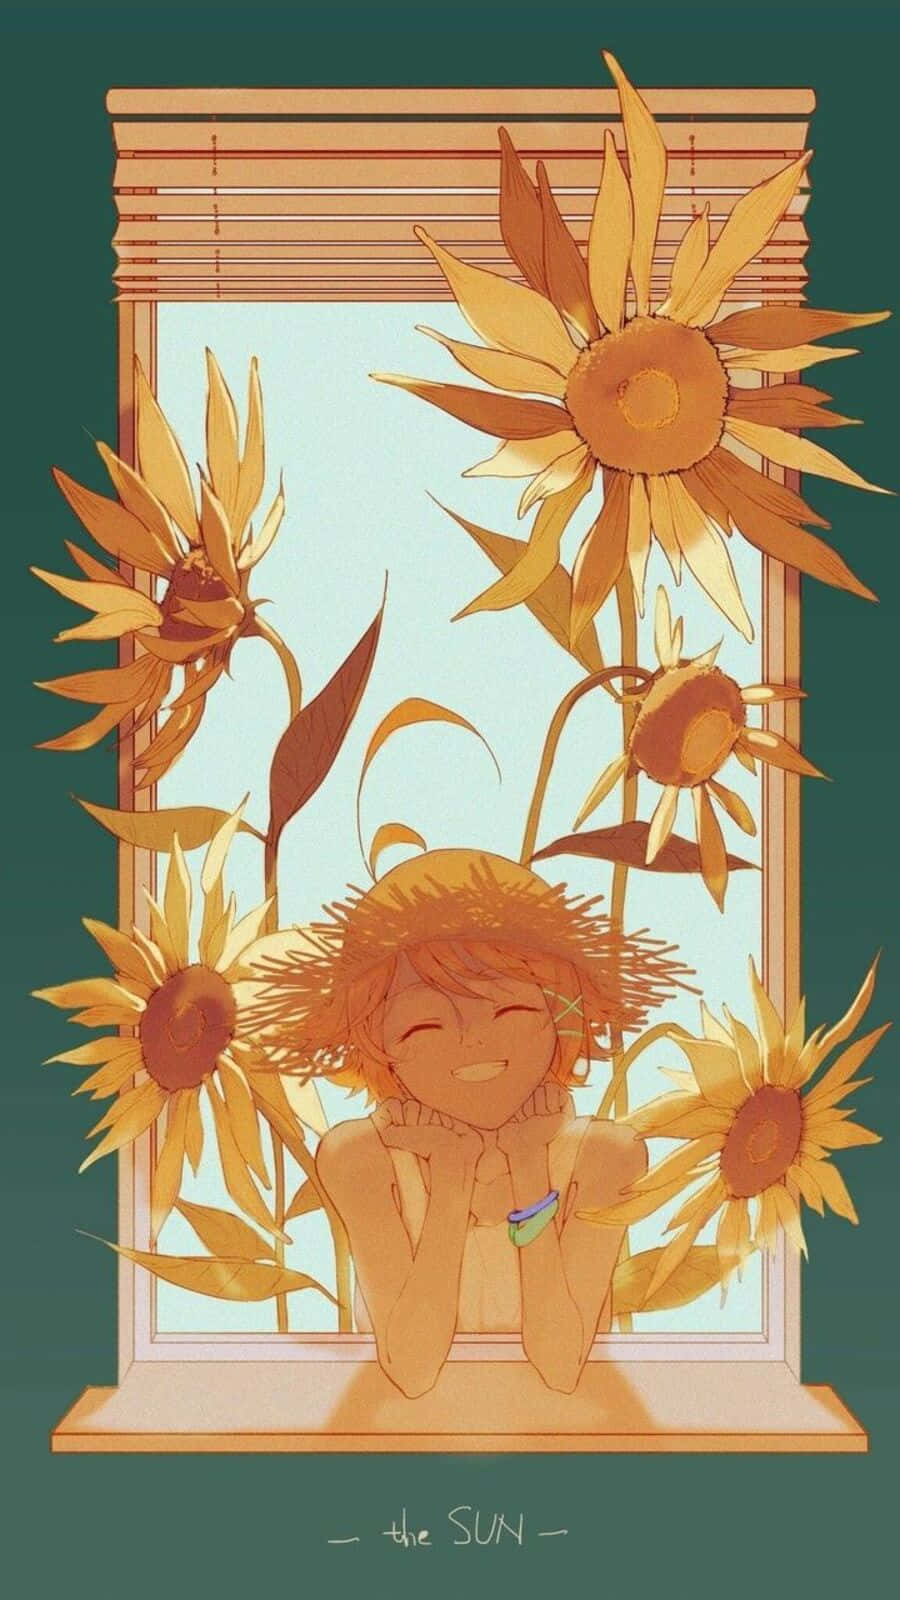 Emma from The Promised Neverland animated series, showcasing her bright smile and determination. Wallpaper